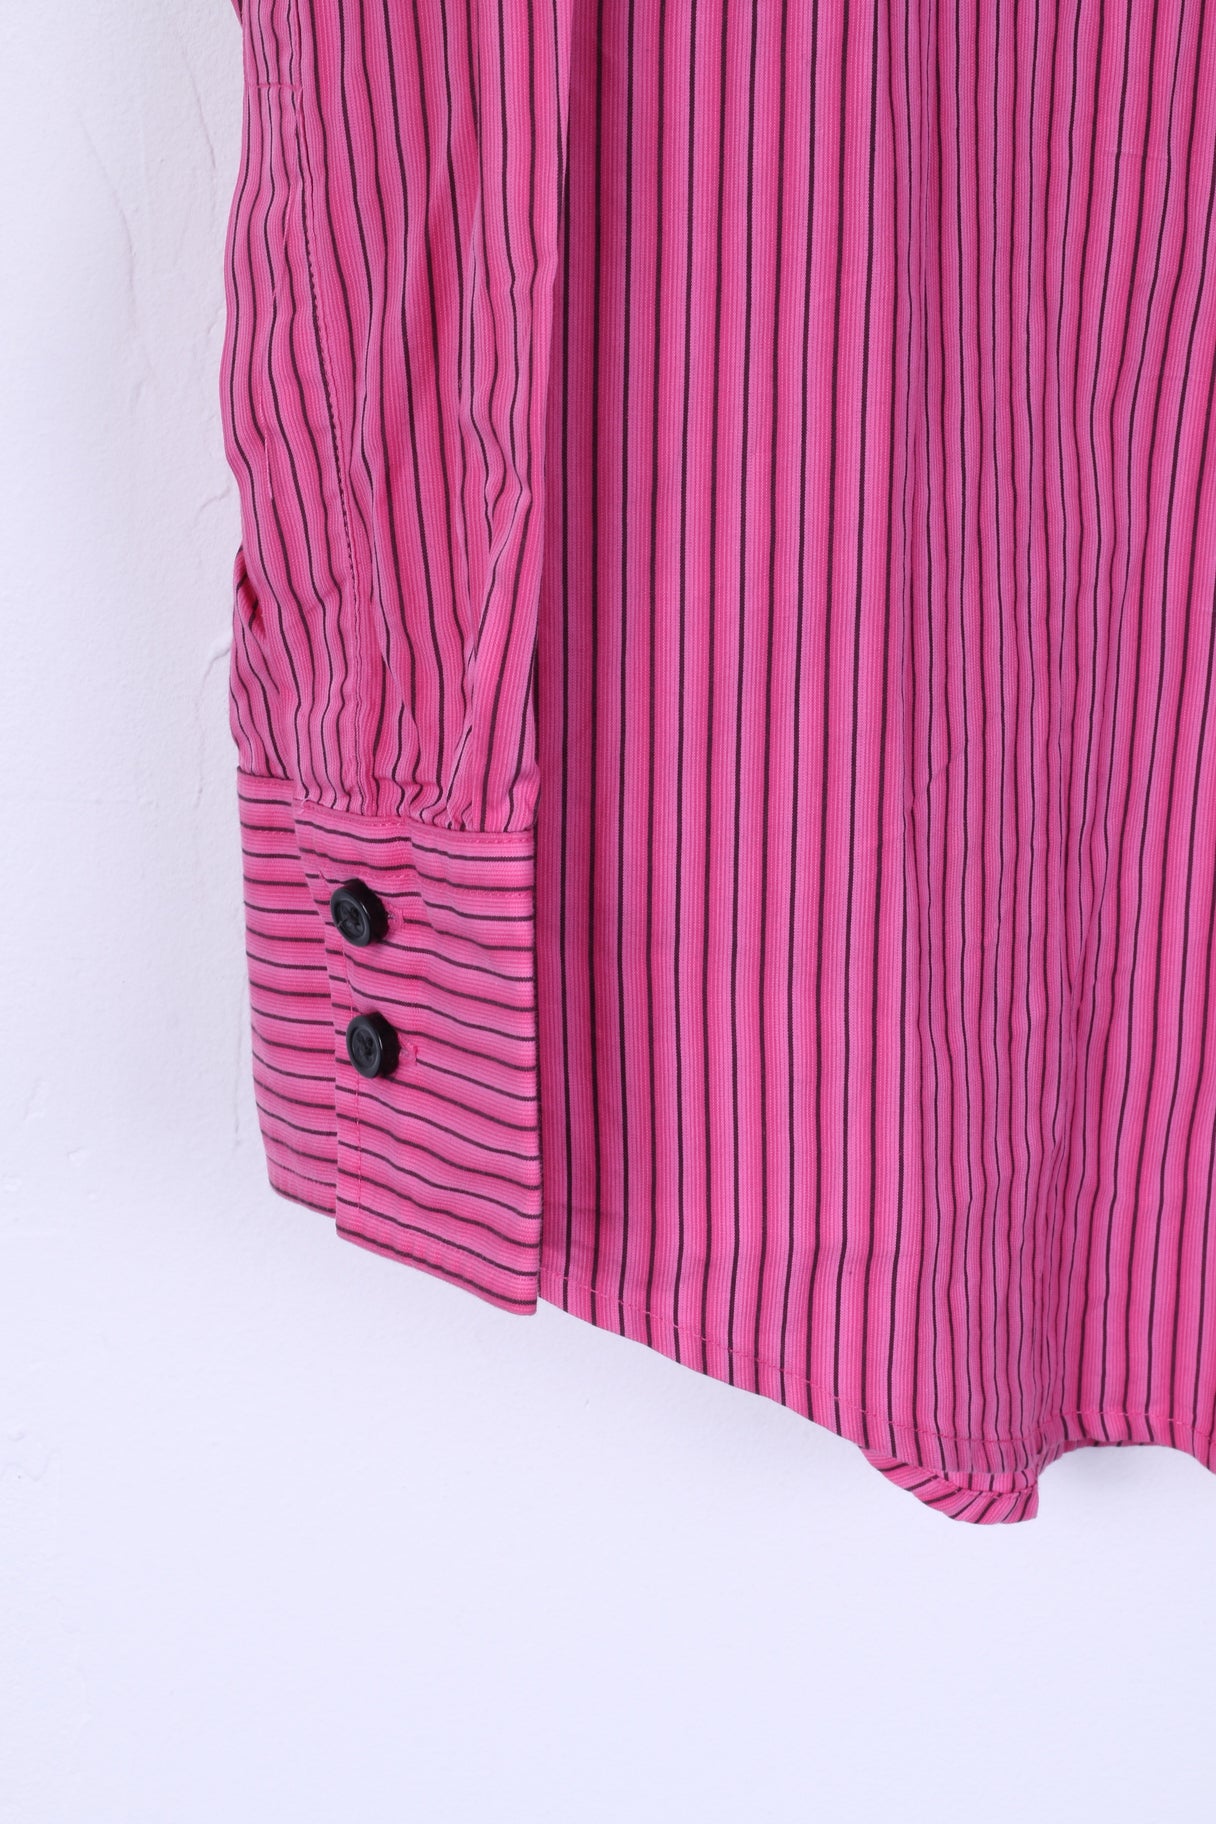 TM Lewin Mens 17 34.5 L Casual Shirt Pink Striped Rovereto Fitted Cotton